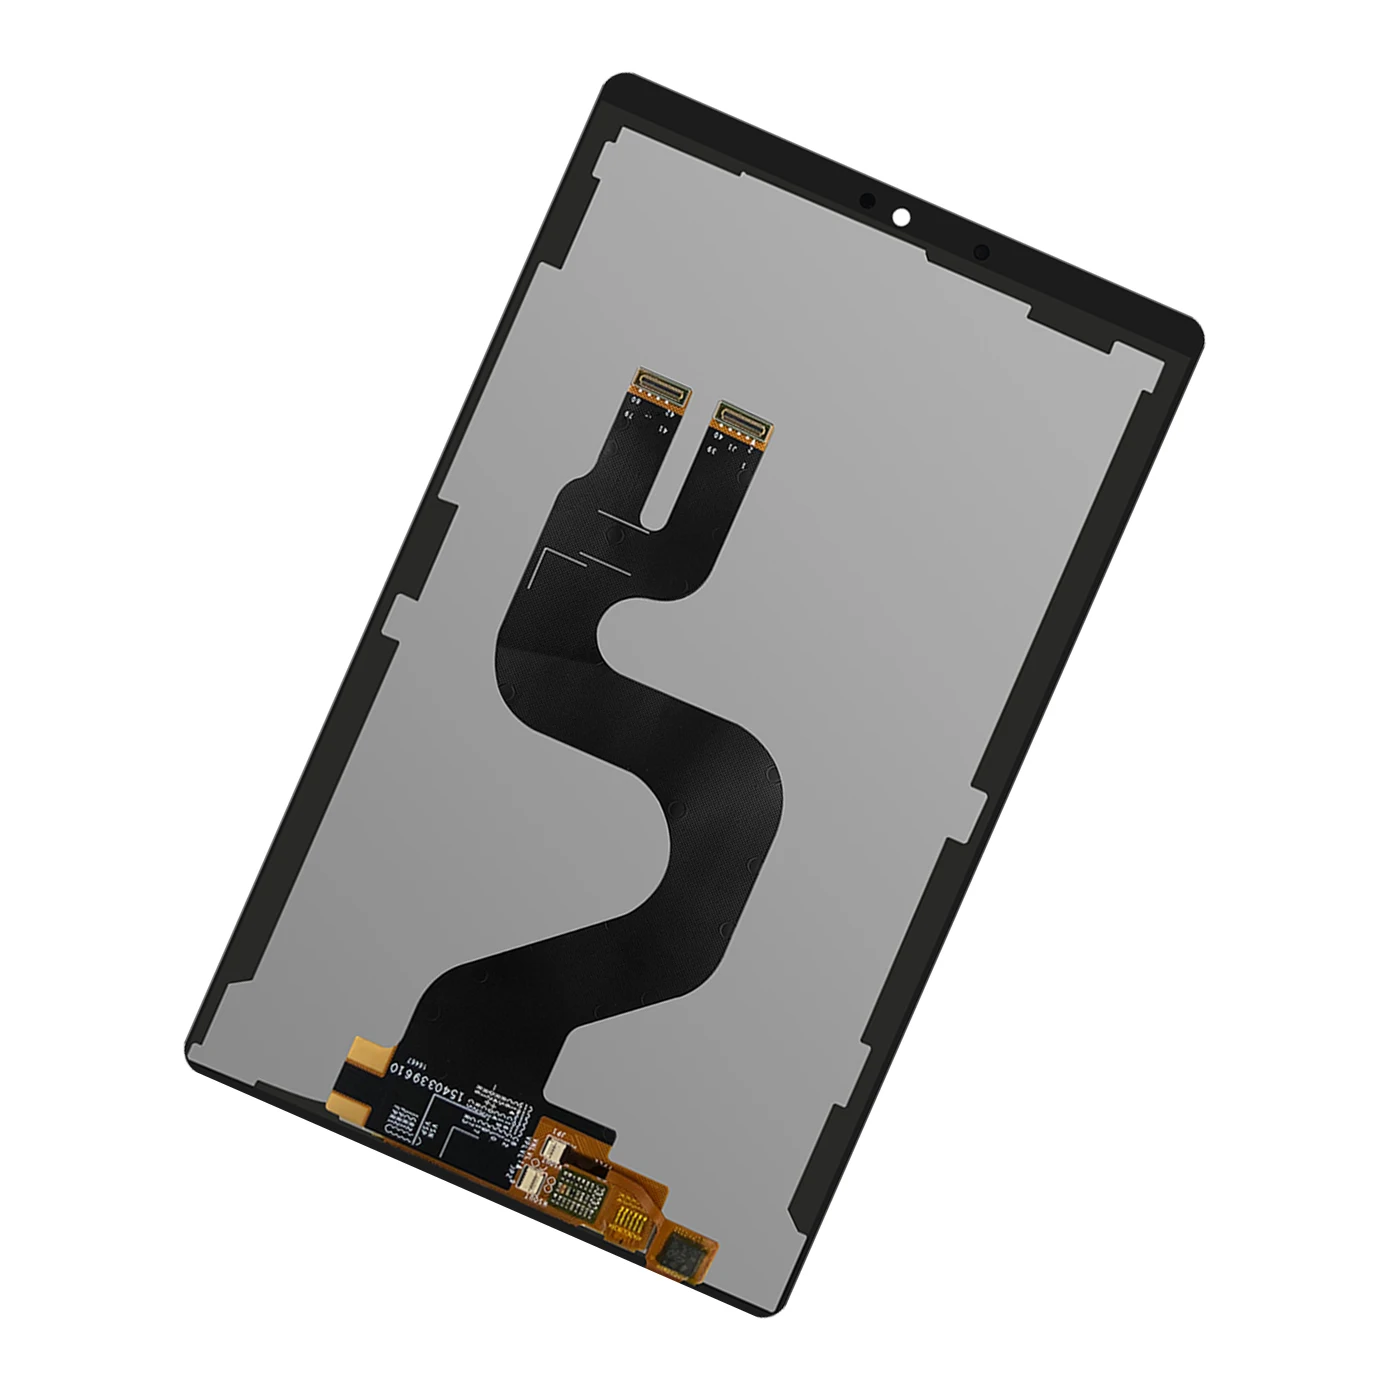 Original LCD 8.4 For Huawei MediaPad M6 Turbo 8.4 VRD-AL10 VRD-W10 LCD Display Touch Screen Digitizer Assembly For Huawei M6 8.4